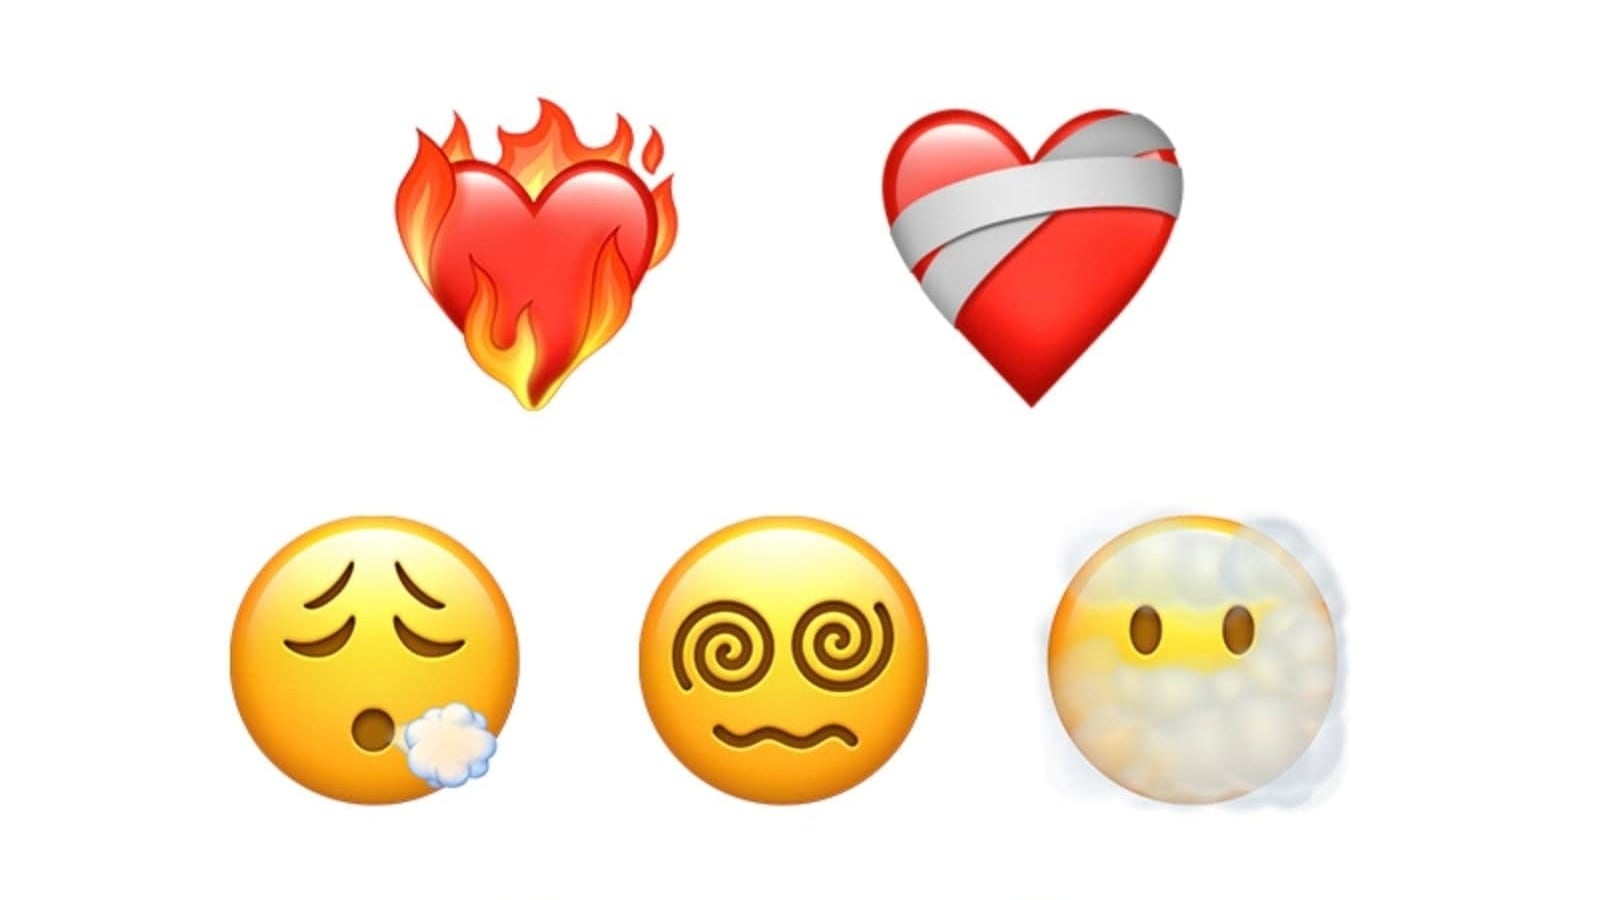 WhatsApp user? Big emoji update rolled out! Here is what you